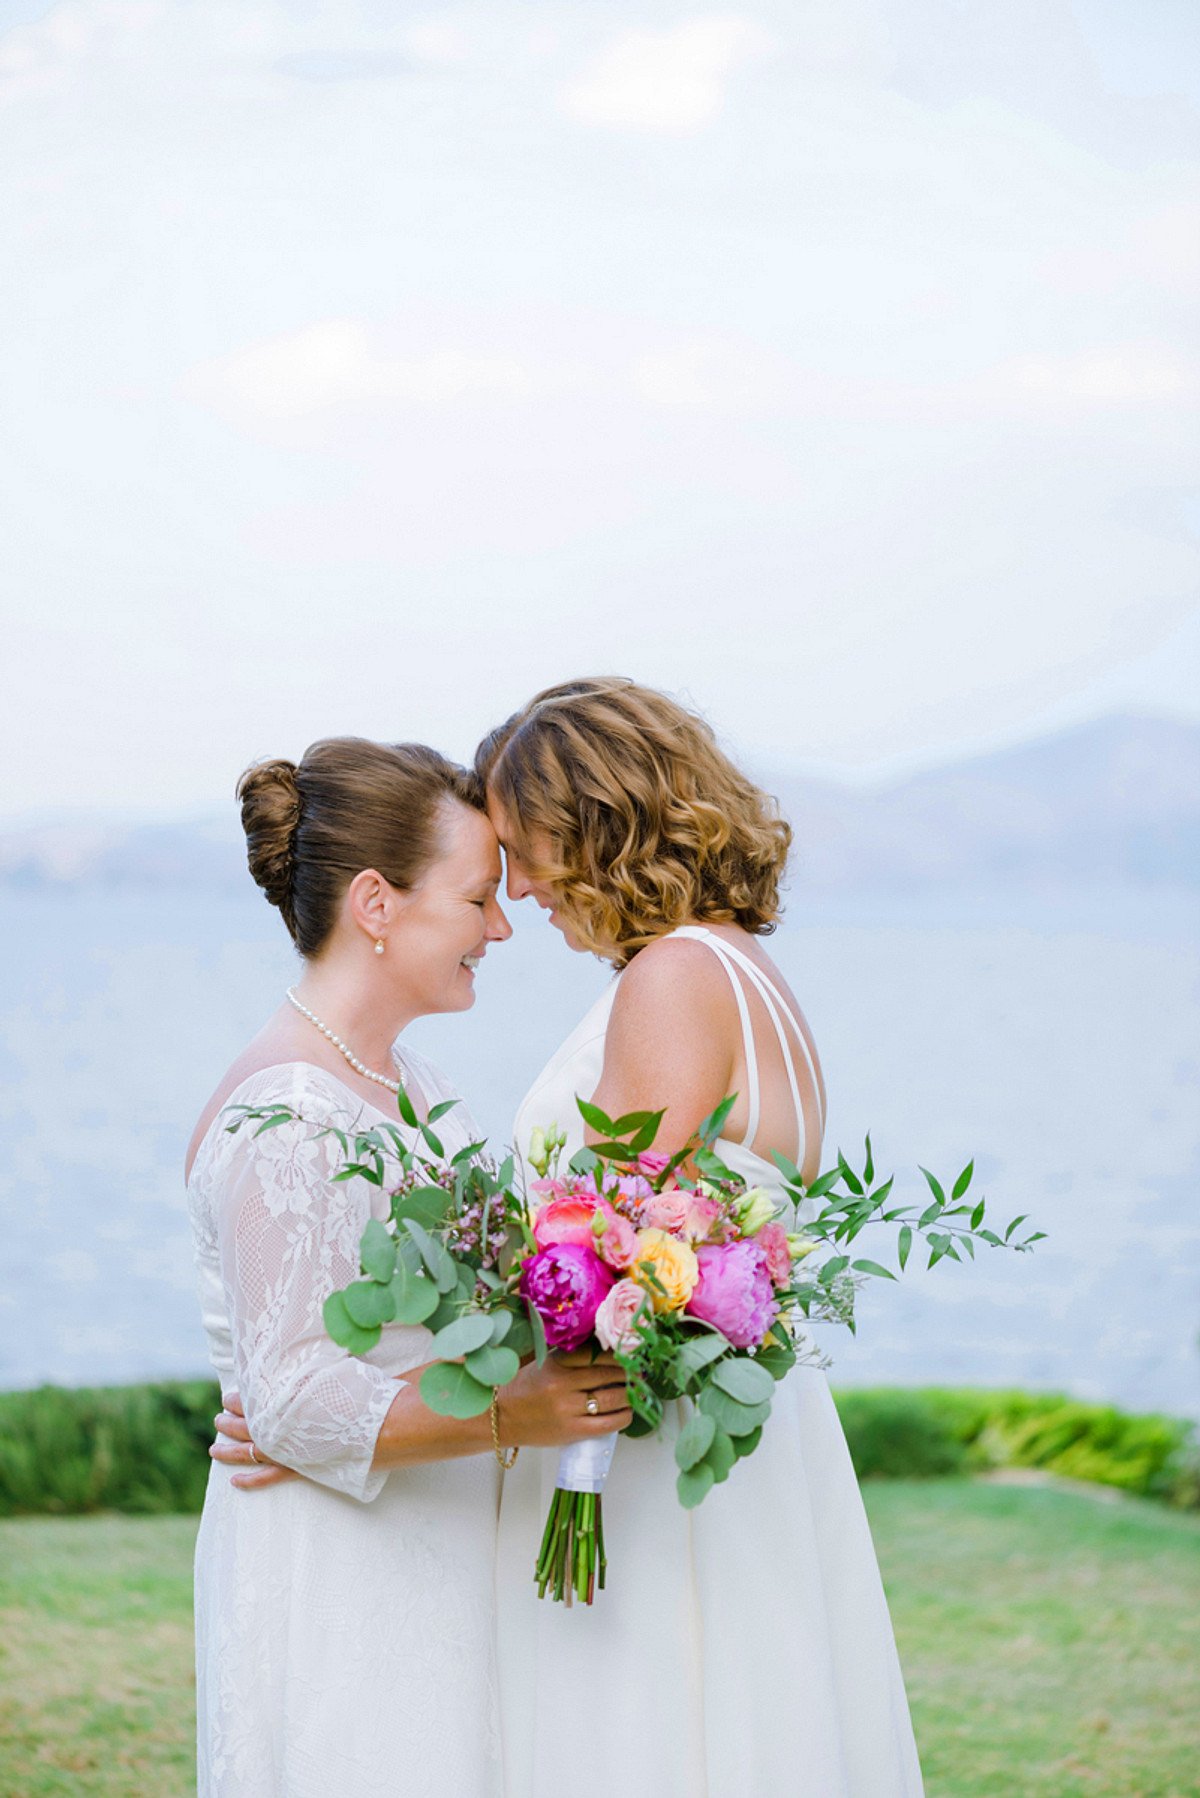 Two brides hugging in joy after their wedding ceremony